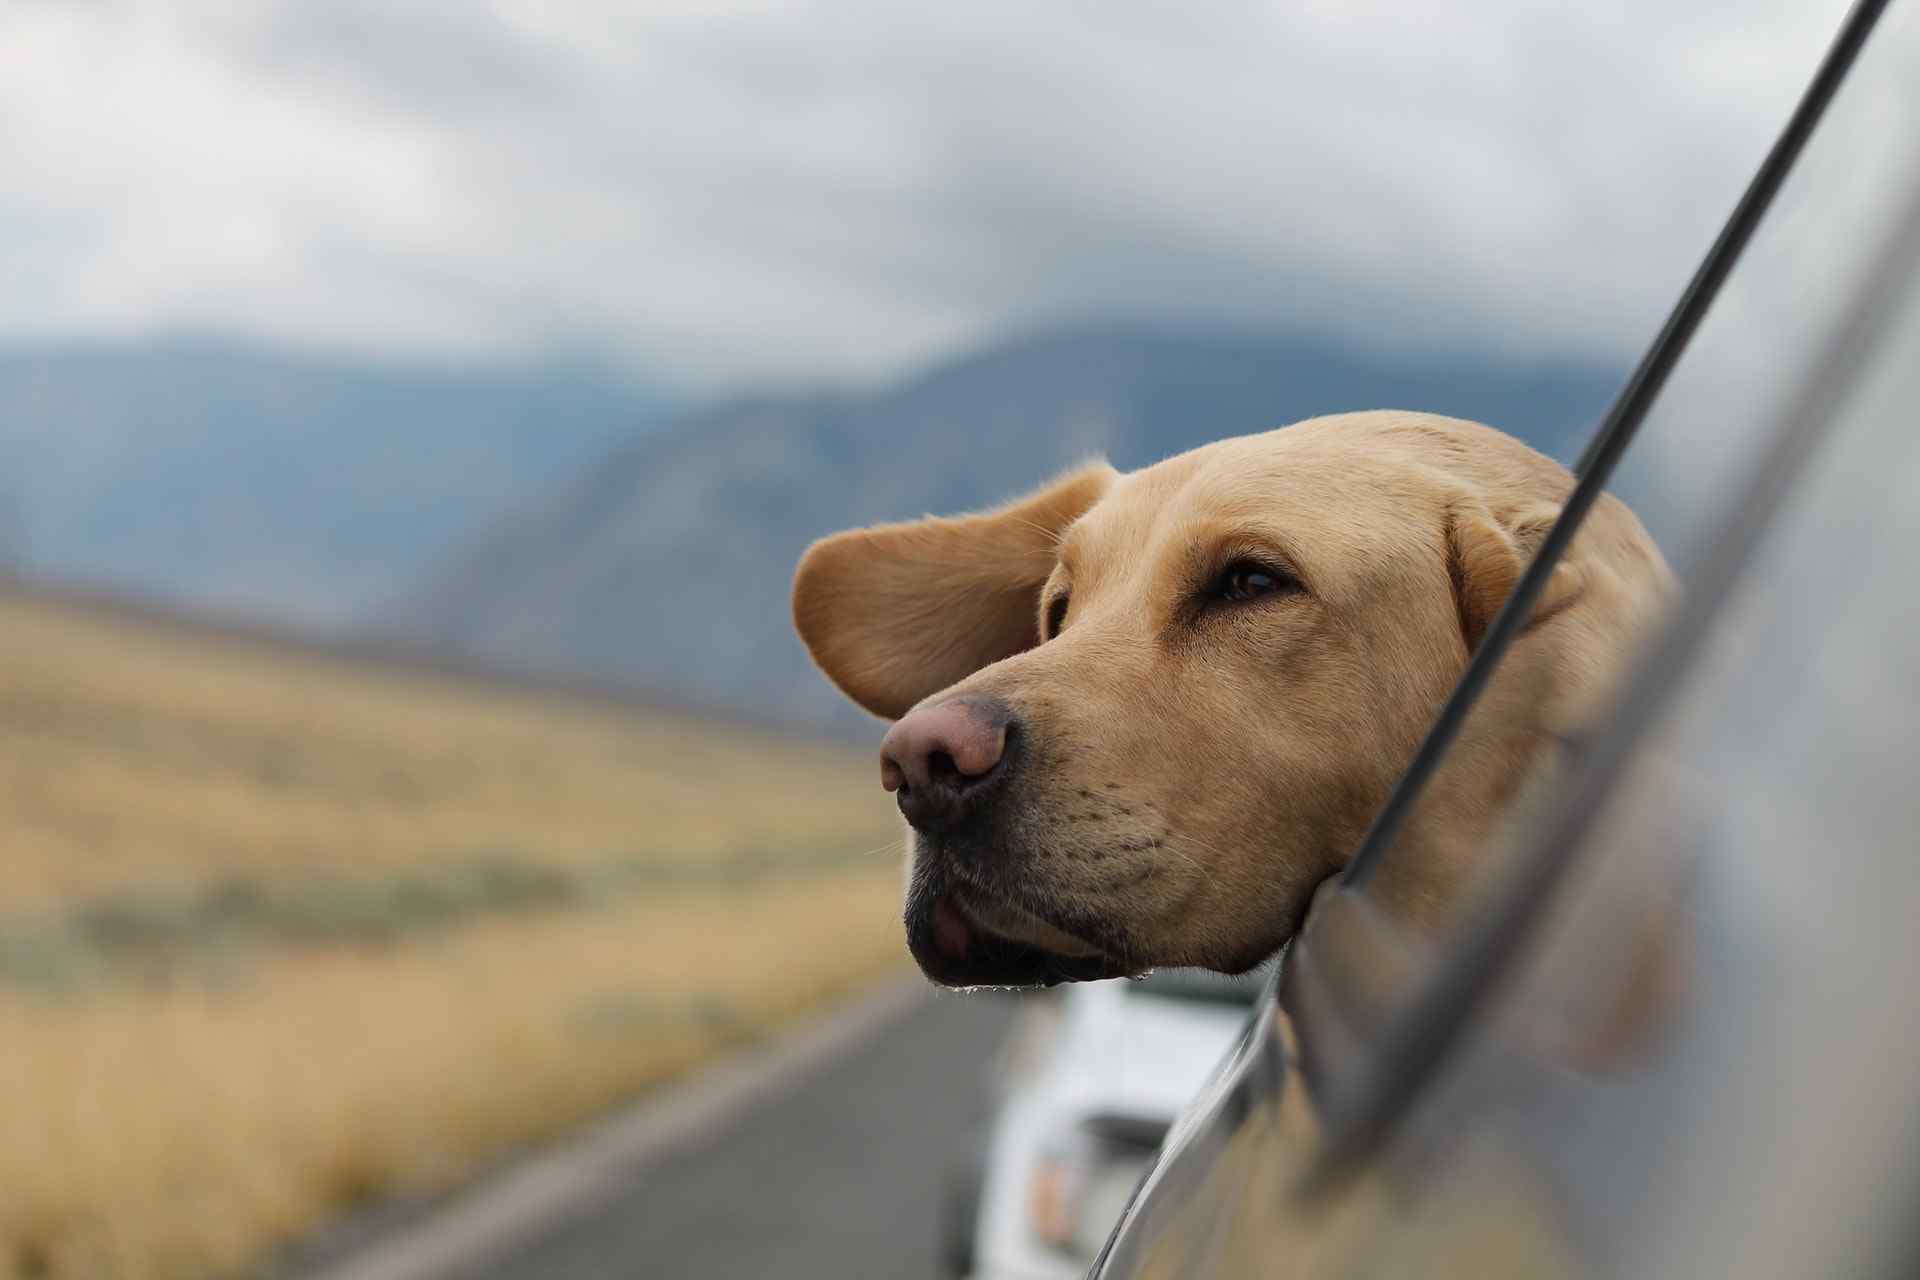 How To Remove Dog Hair From The Car (9 Top Tips and Prevention)